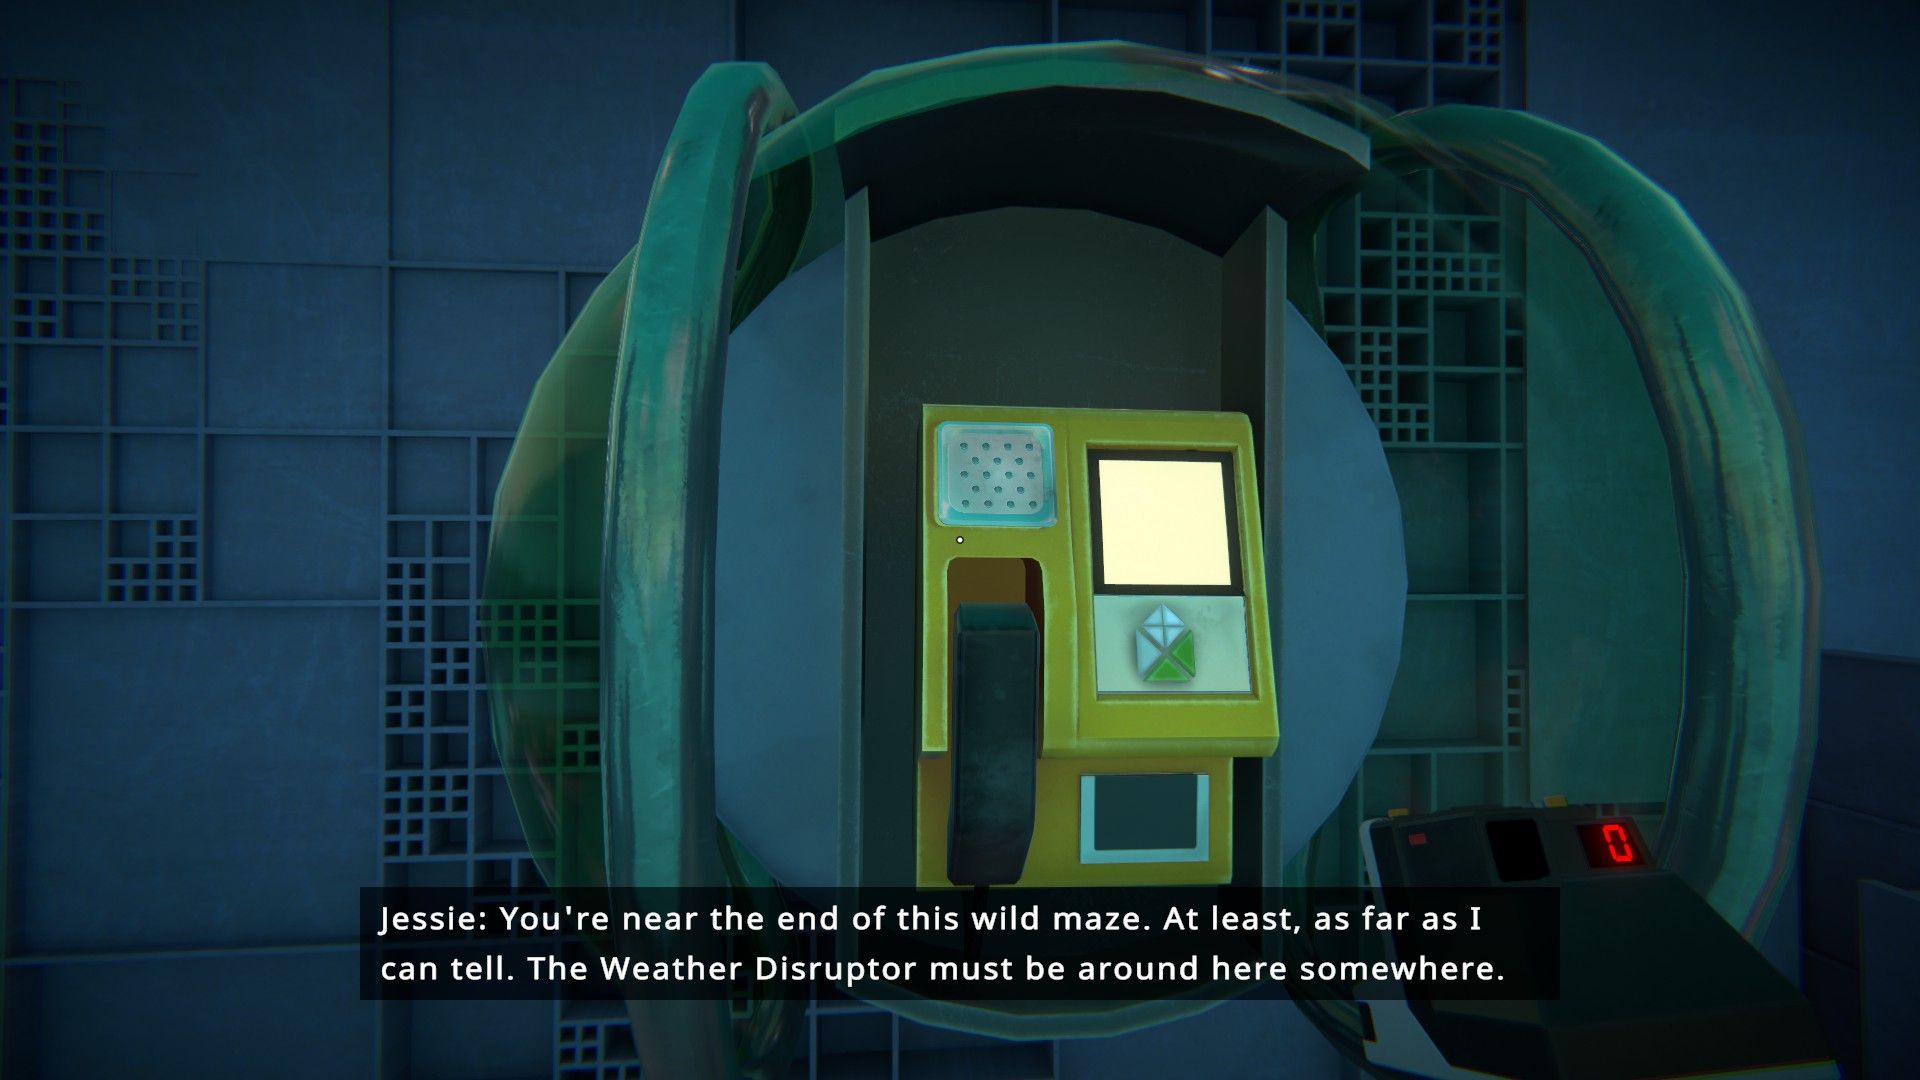 Screenshot with the player character standing in a payphone booth, listening to a message from Jessie: "You're near the end of this wild maze.  At least, as far as I can tell.  The Weather Disruptor must be around here somewhere.